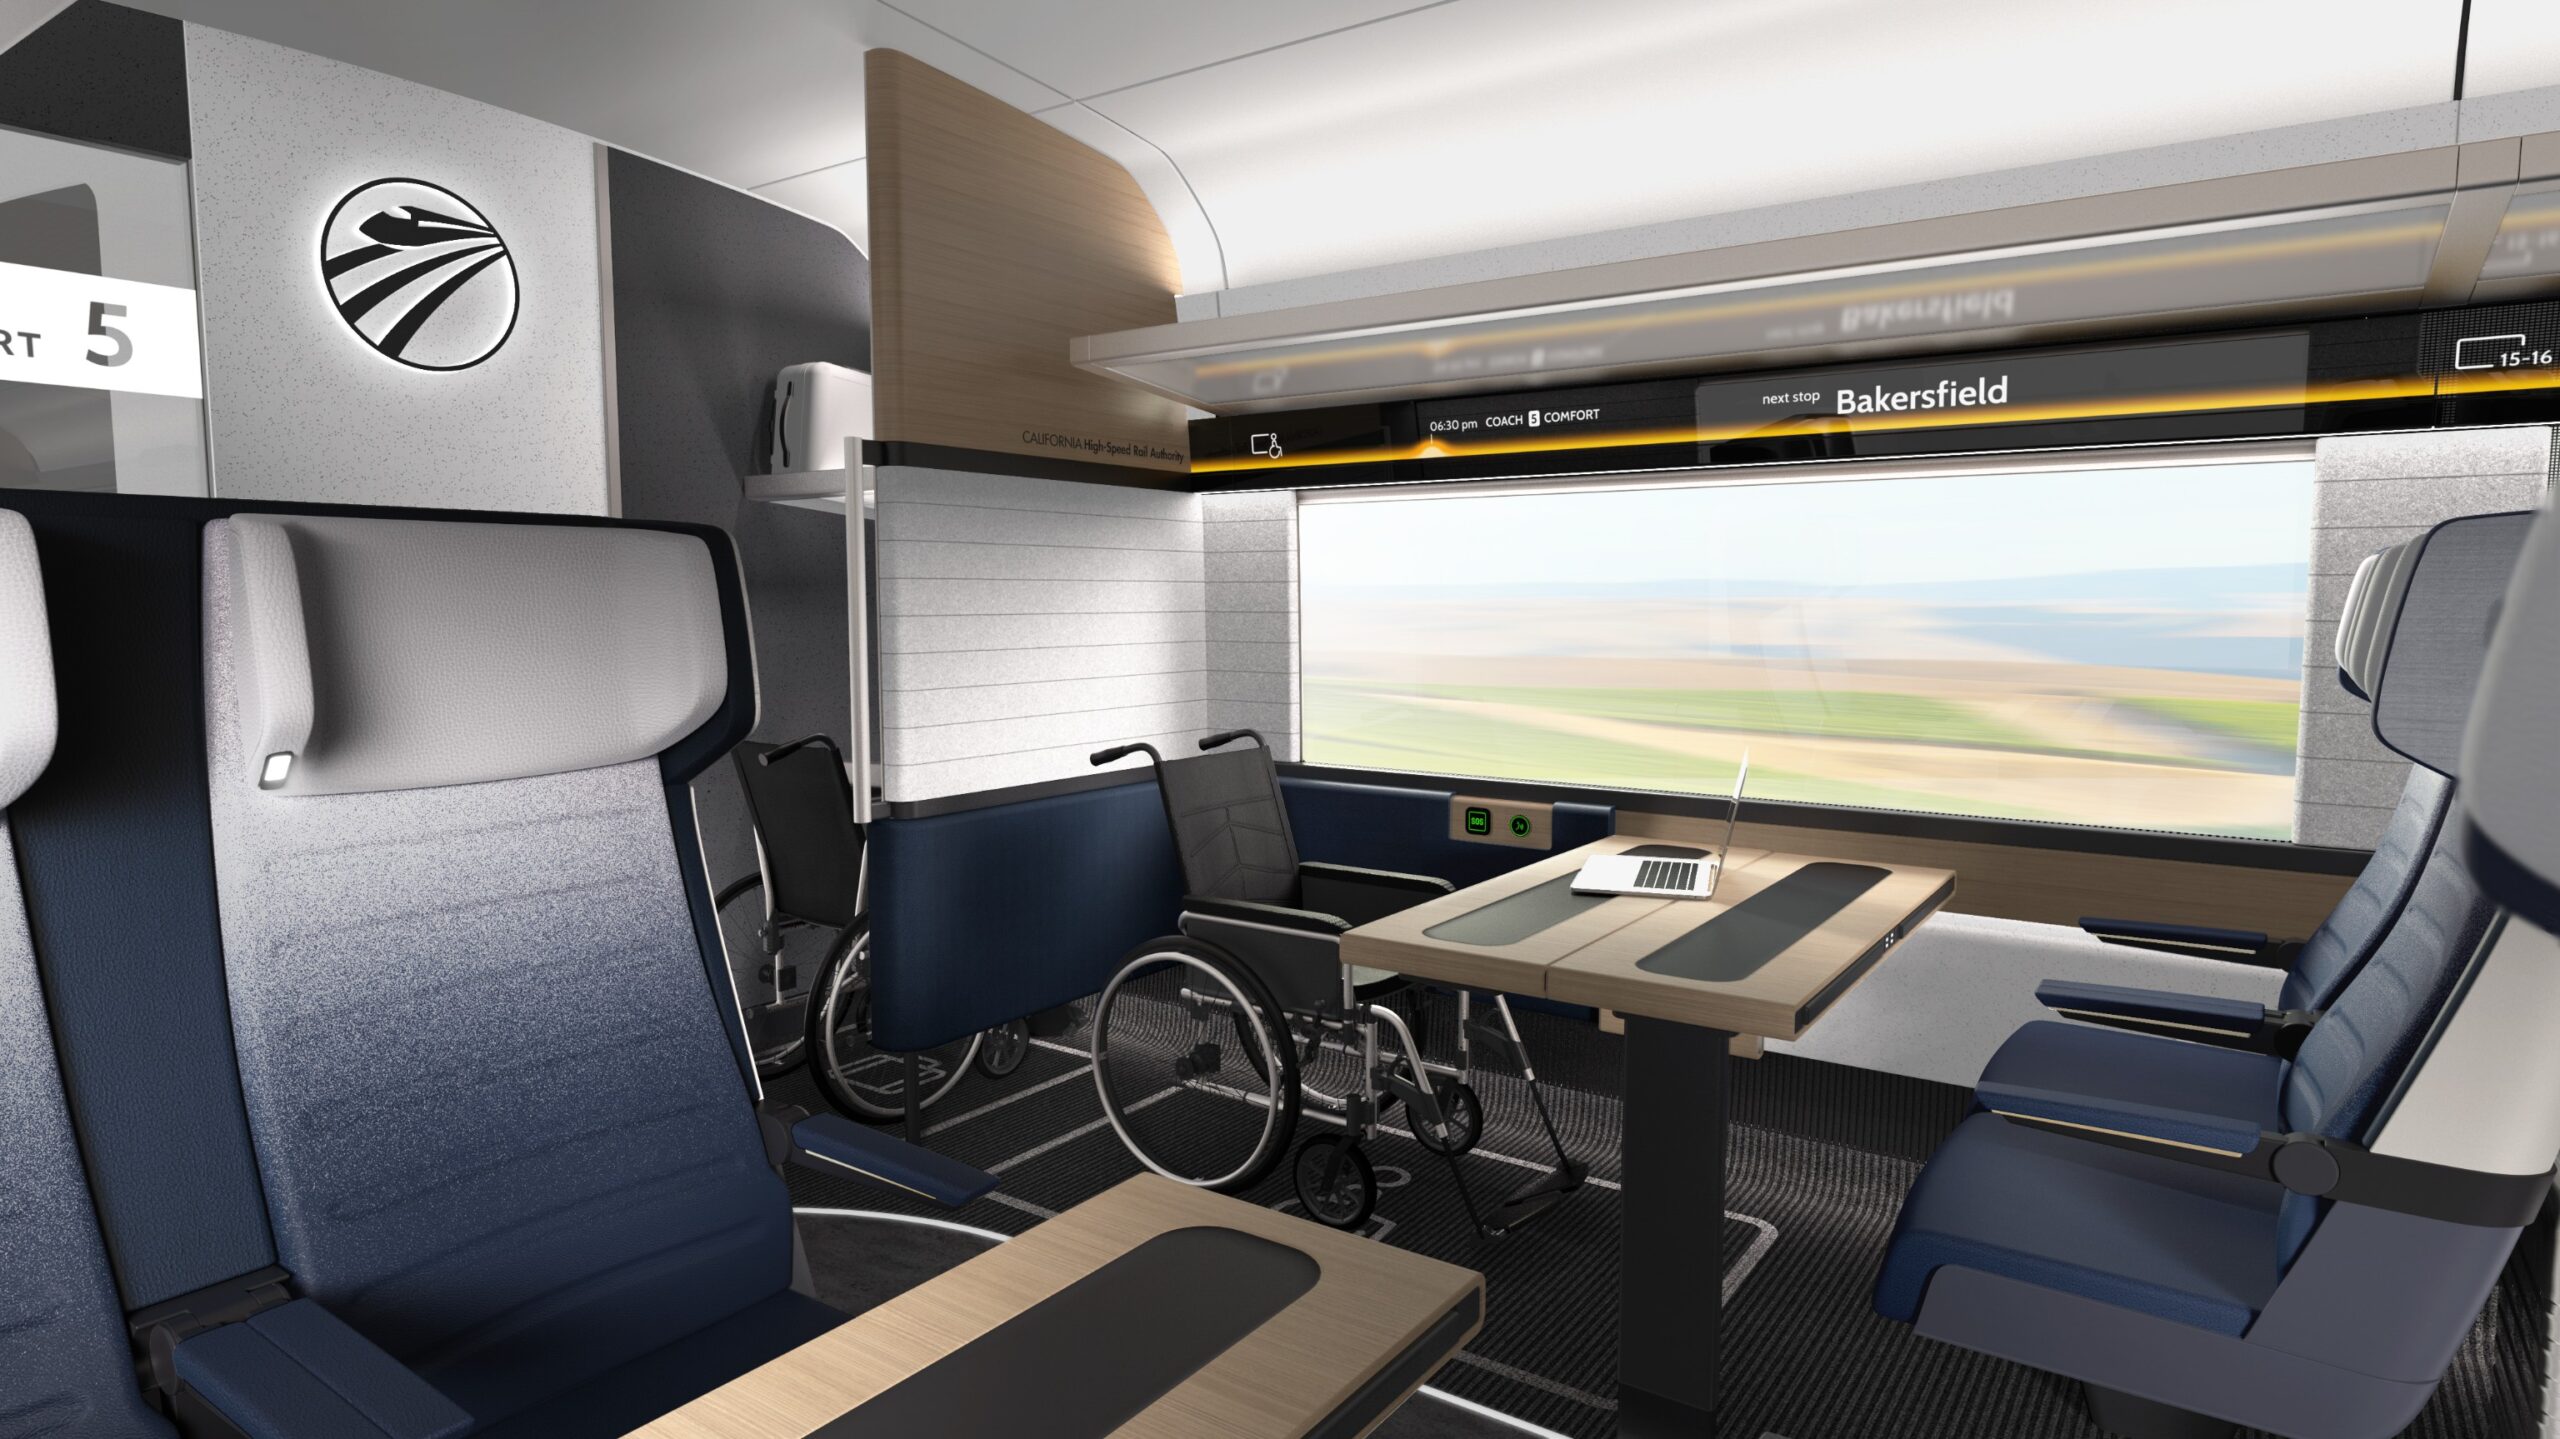 Wheelchair-friendly seating onboard the future high-speed trains 